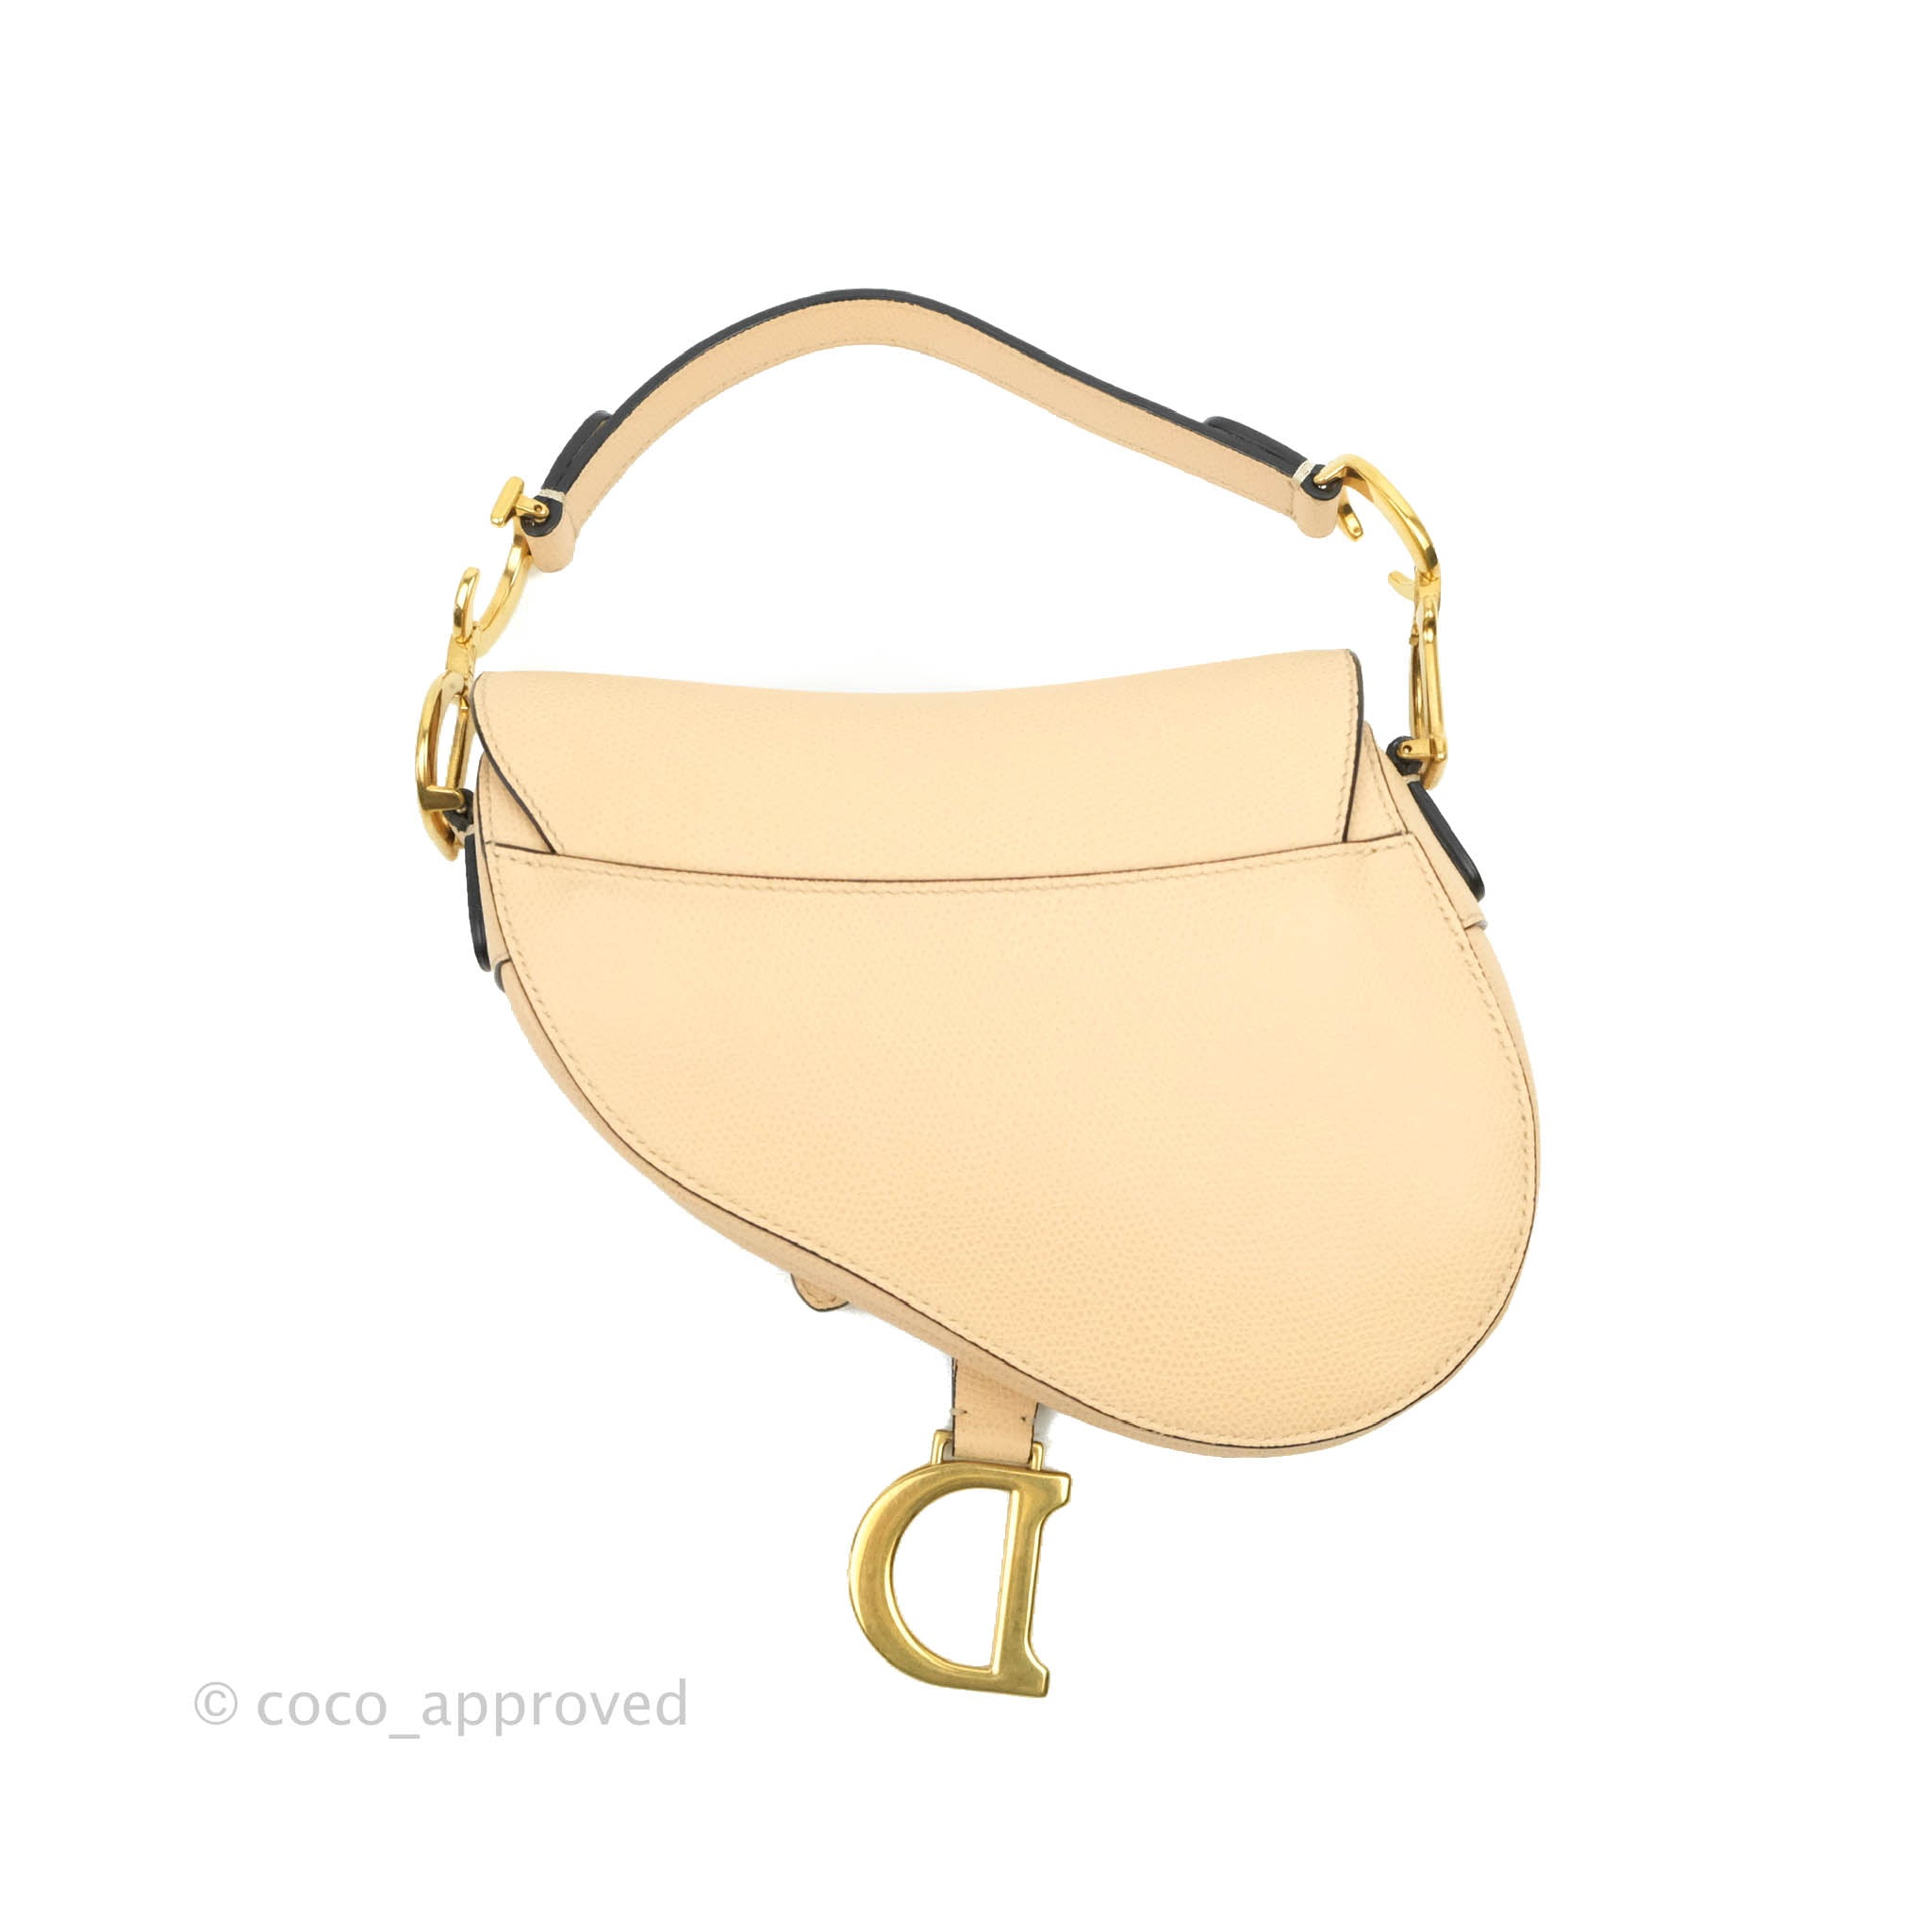 Saddle Bag with Strap Sand Pink Grained Calfskin